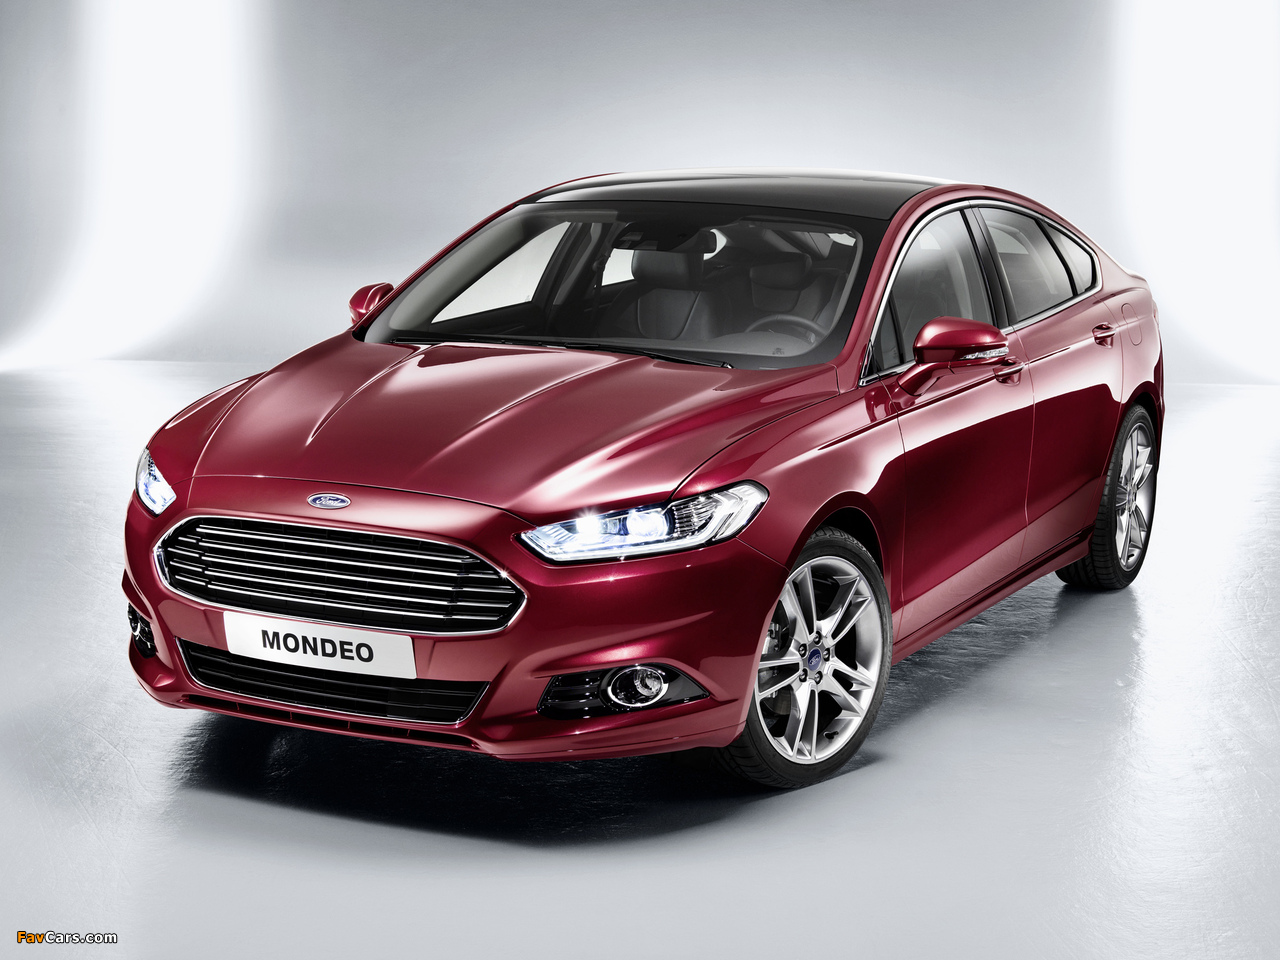 Ford Mondeo Hatchback 2013 pictures (1280 x 960)